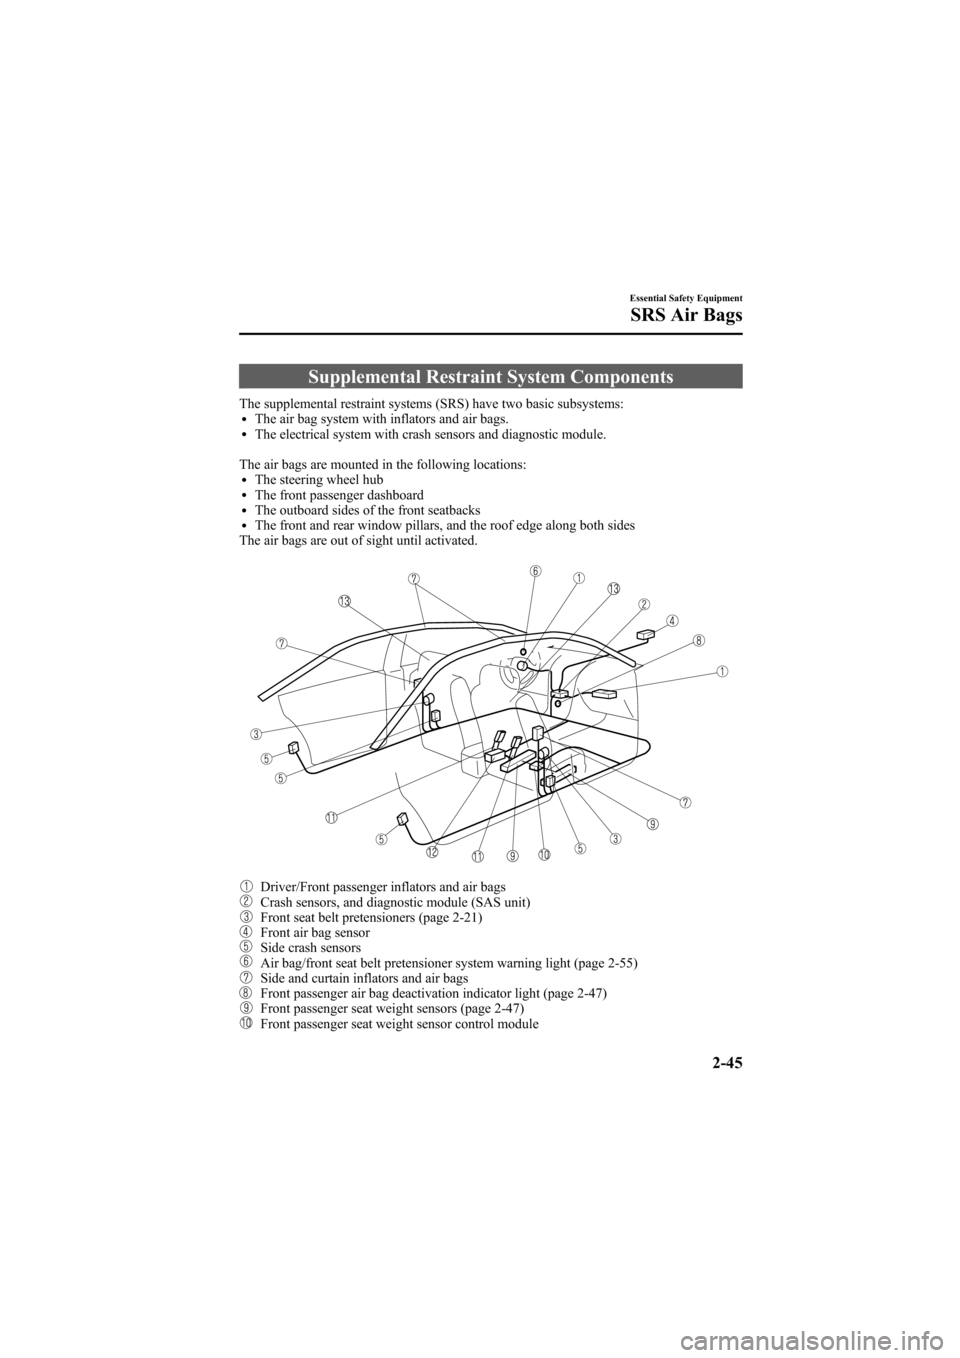 MAZDA MODEL 6 2009  Owners Manual (in English) Black plate (57,1)
Supplemental Restraint System Components
The supplemental restraint systems (SRS) have two basic subsystems:lThe air bag system with inflators and air bags.lThe electrical system wi